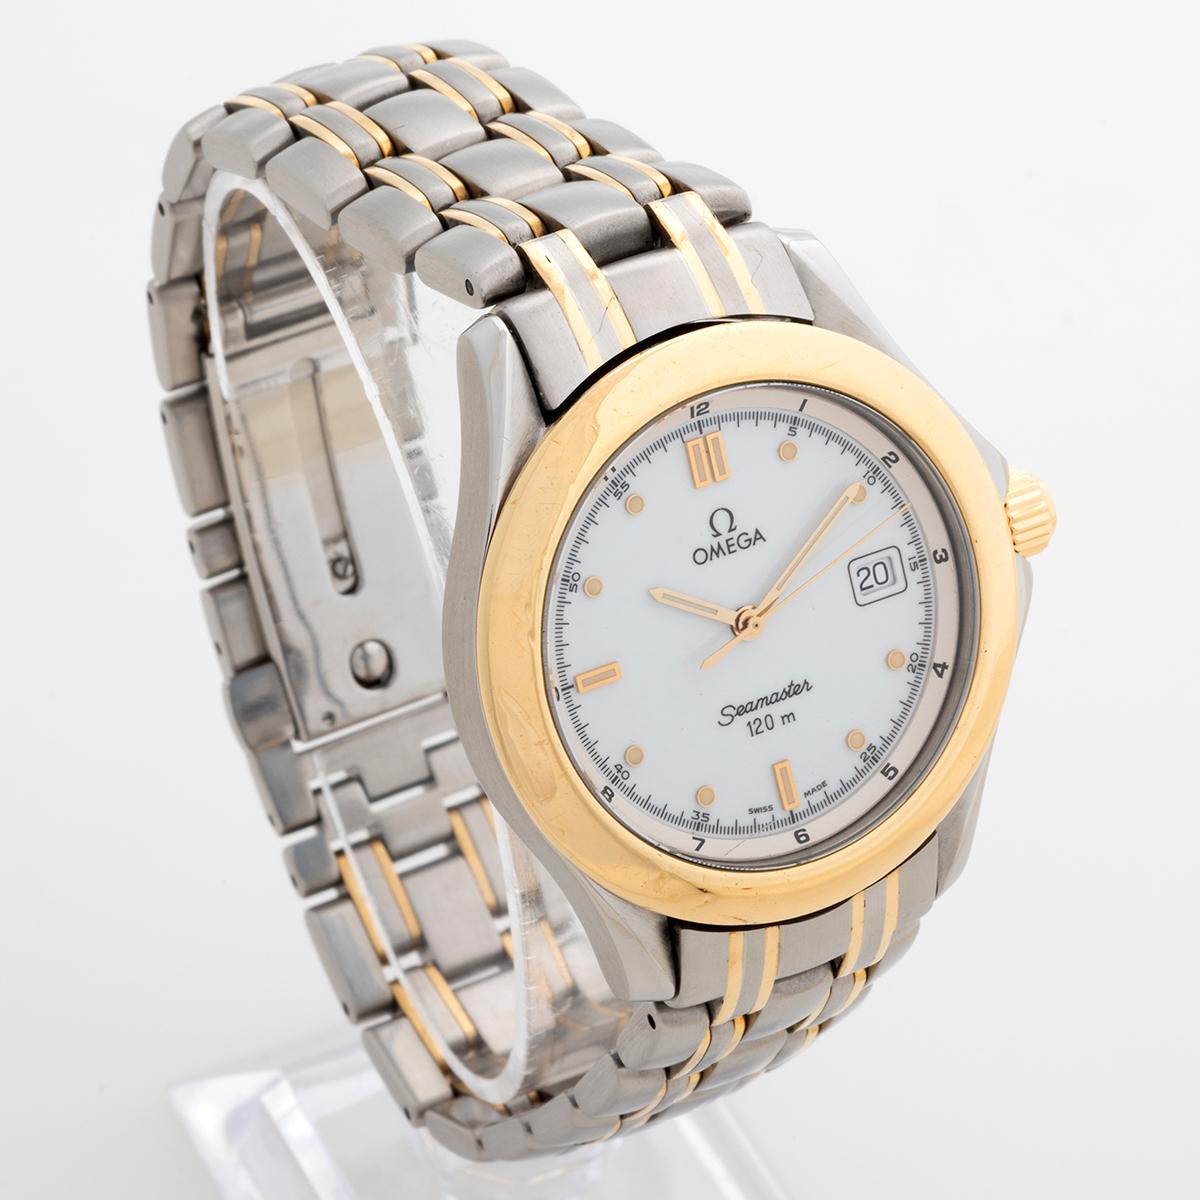 Our rare and desirable Omega Seamaster reference 2311.21.00 features a stainless steel and 18k yellow gold 36mm case and stainless steel and 18k yellow gold bracelet with white dial. Benefitting from a full Omega service in January 2022 , and unworn